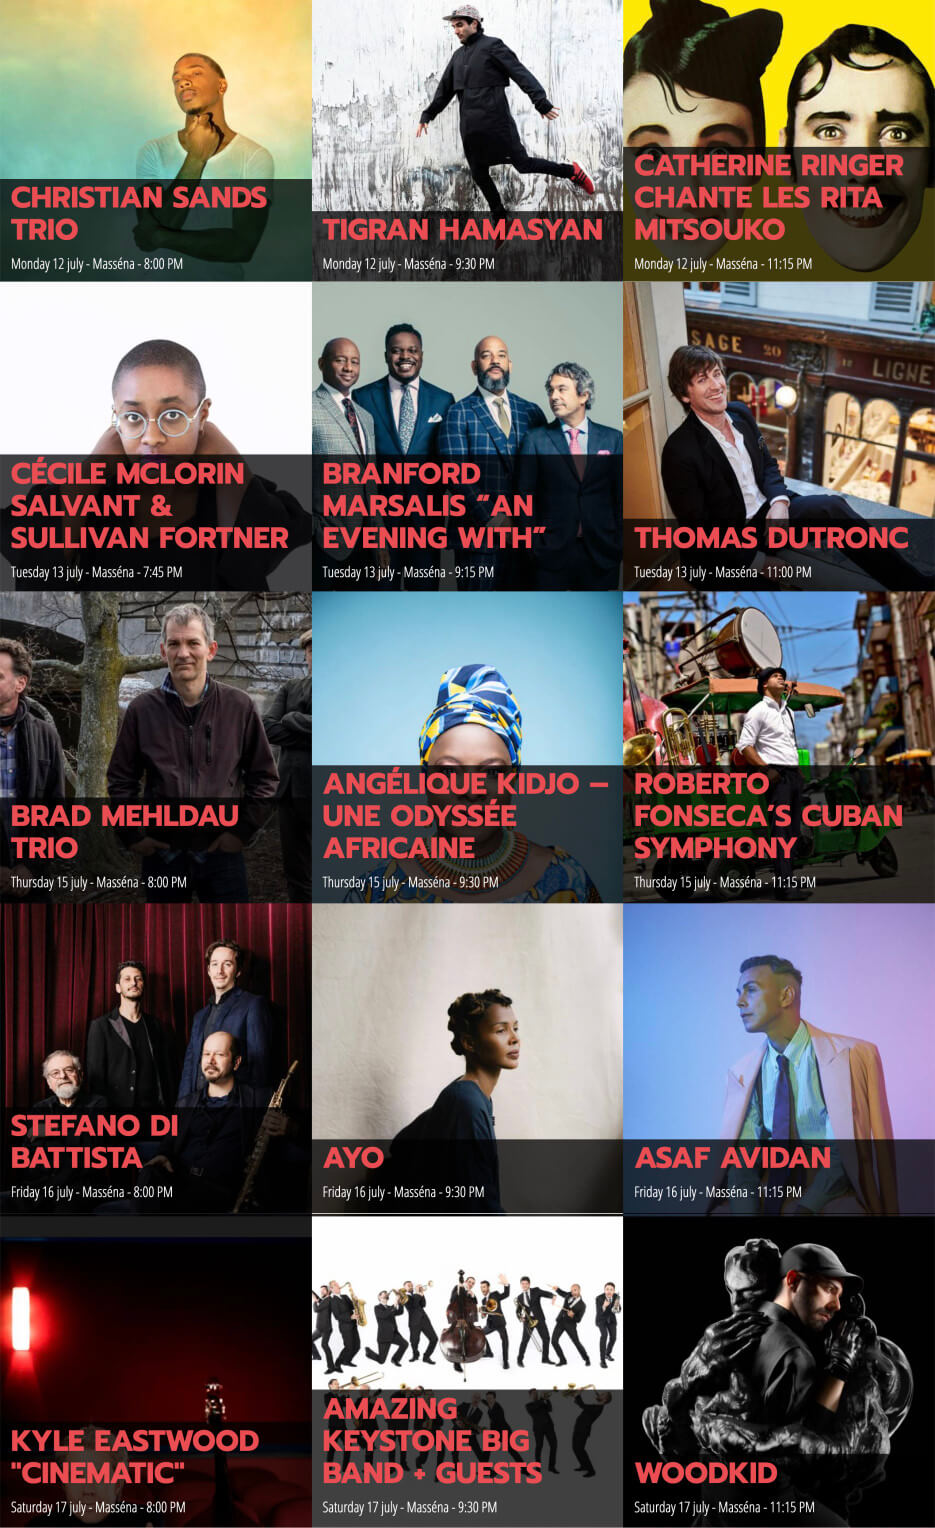 Poster for the lineup of musicians for this year's Jazz Festival in Nice